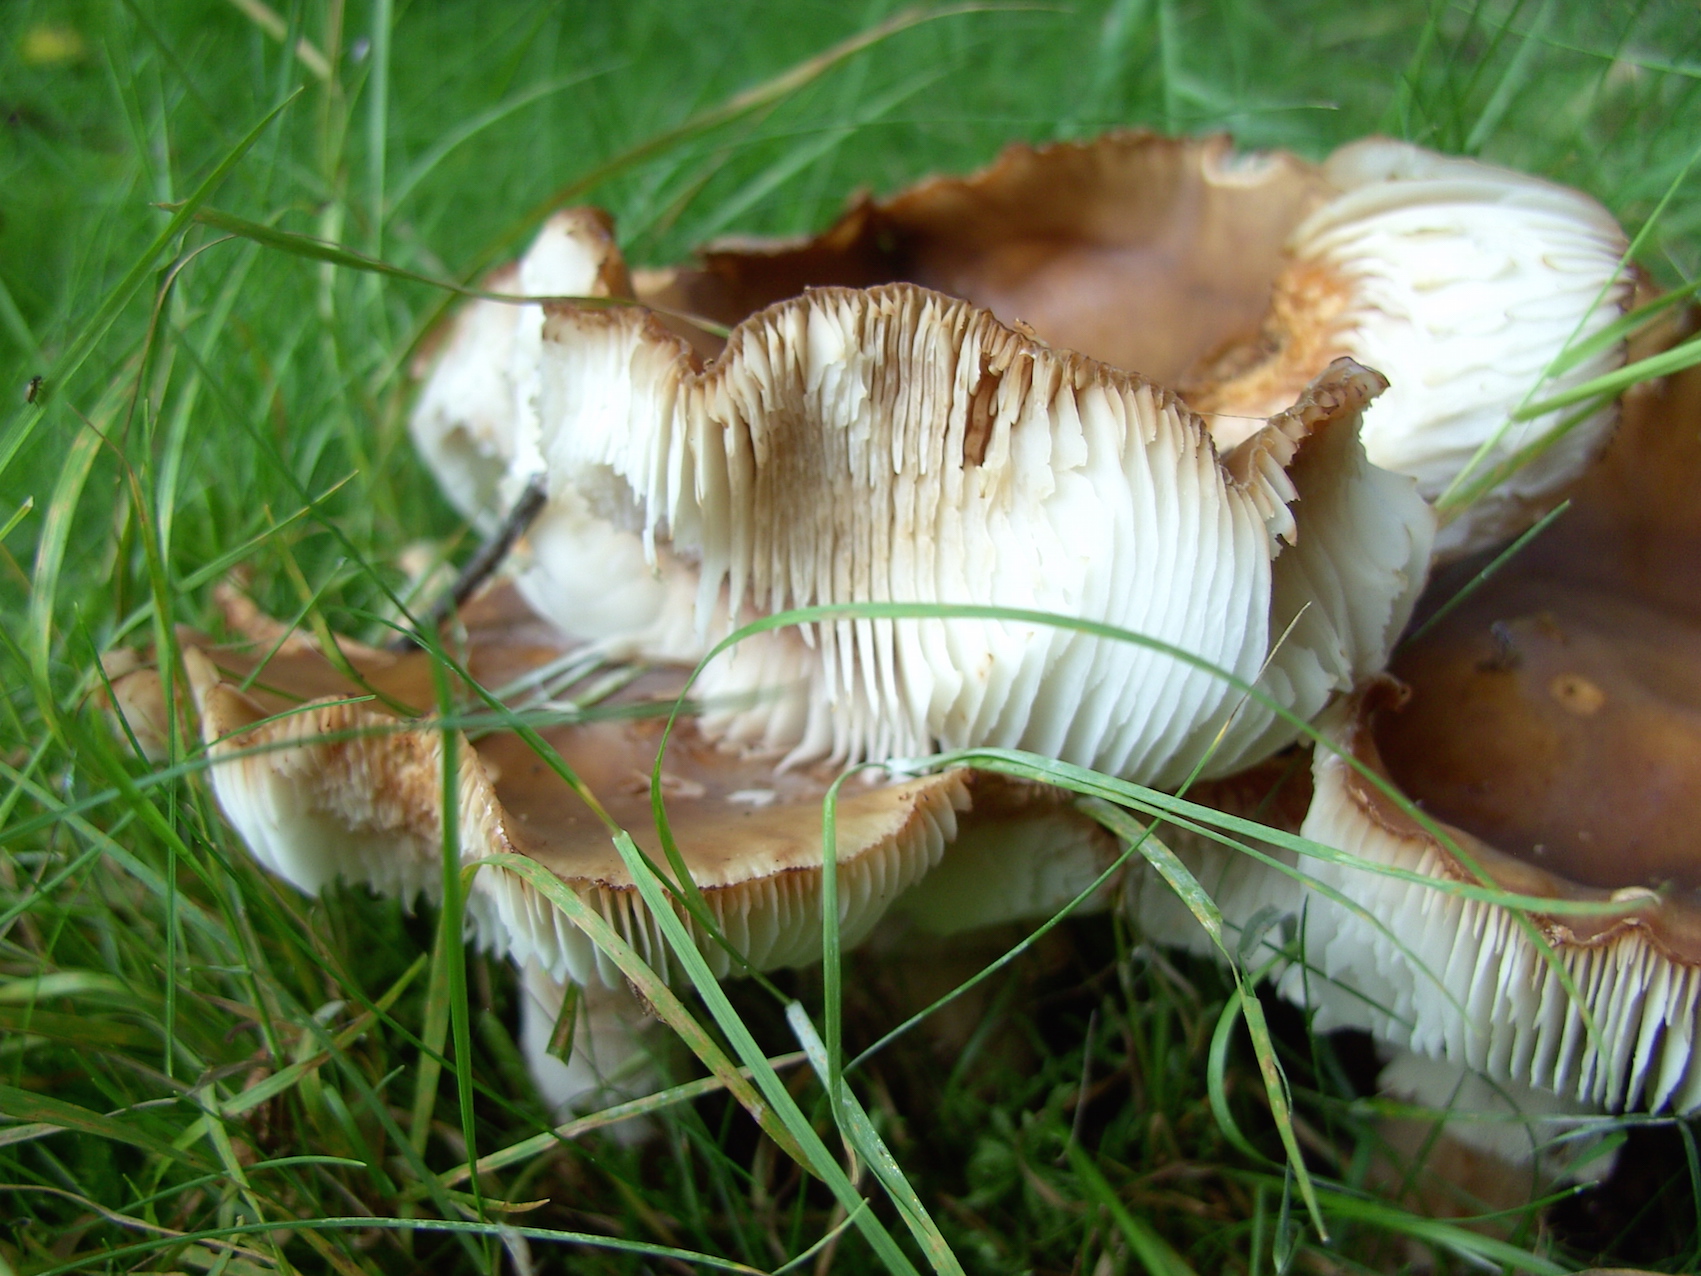 Mushrooms with brown top and white underside